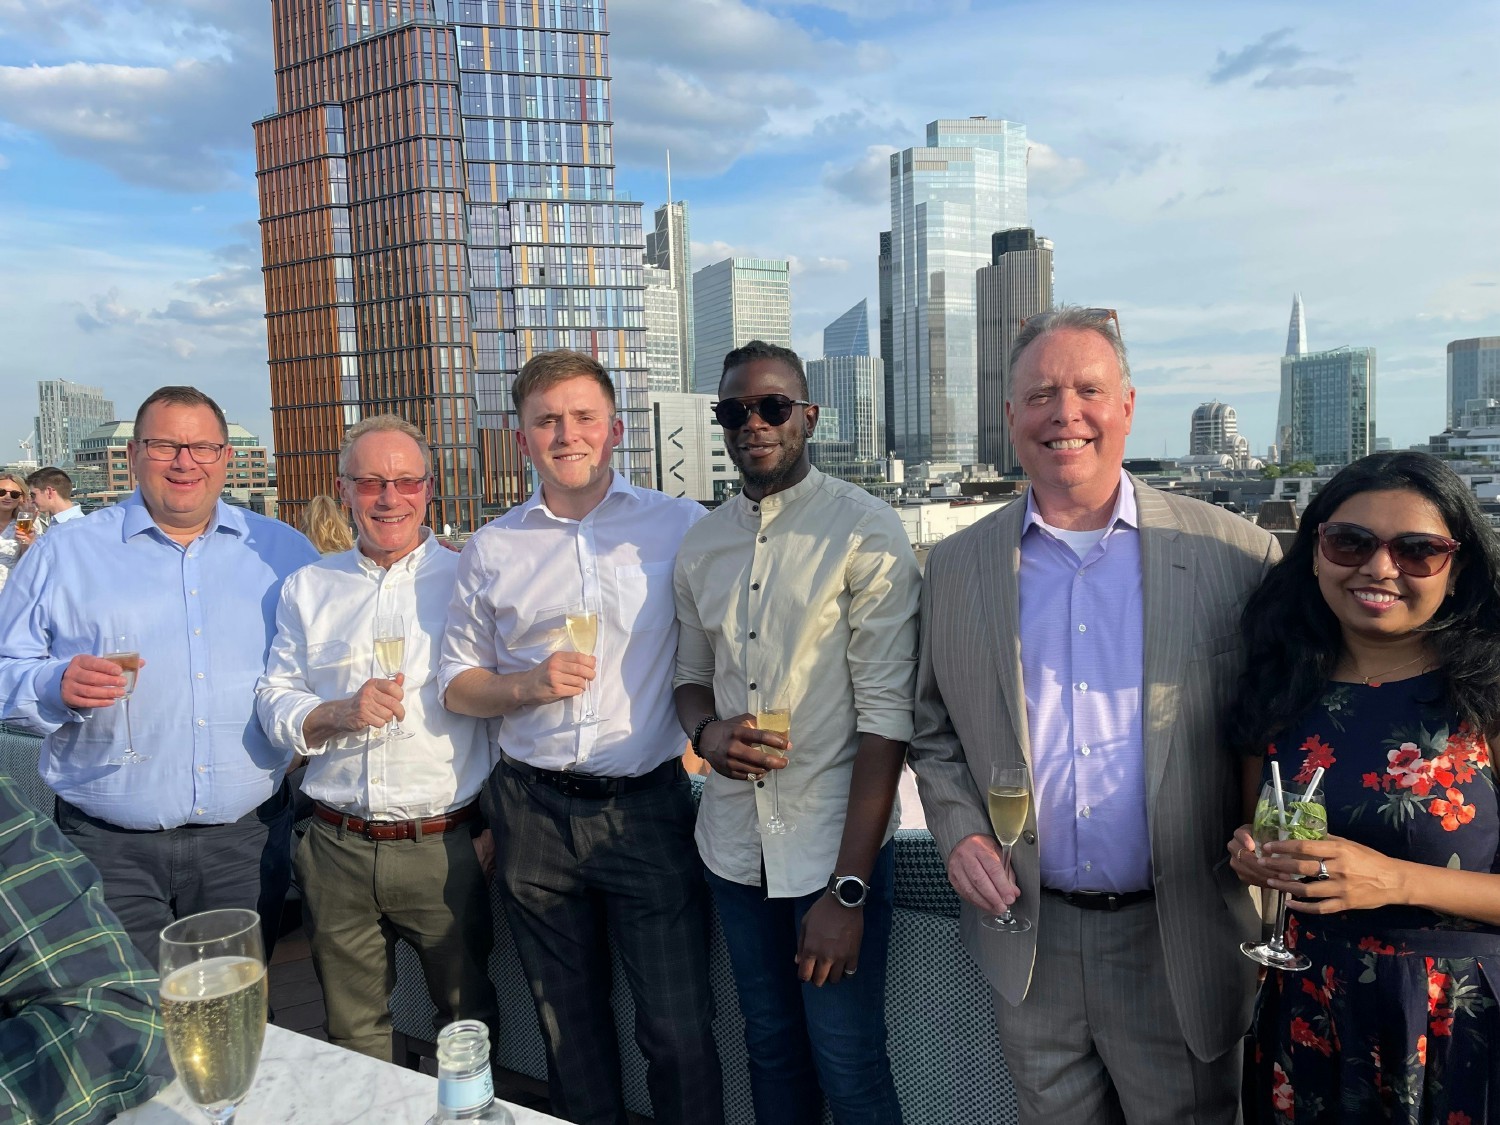  Sunset happy hour in London in celebration of promotions.